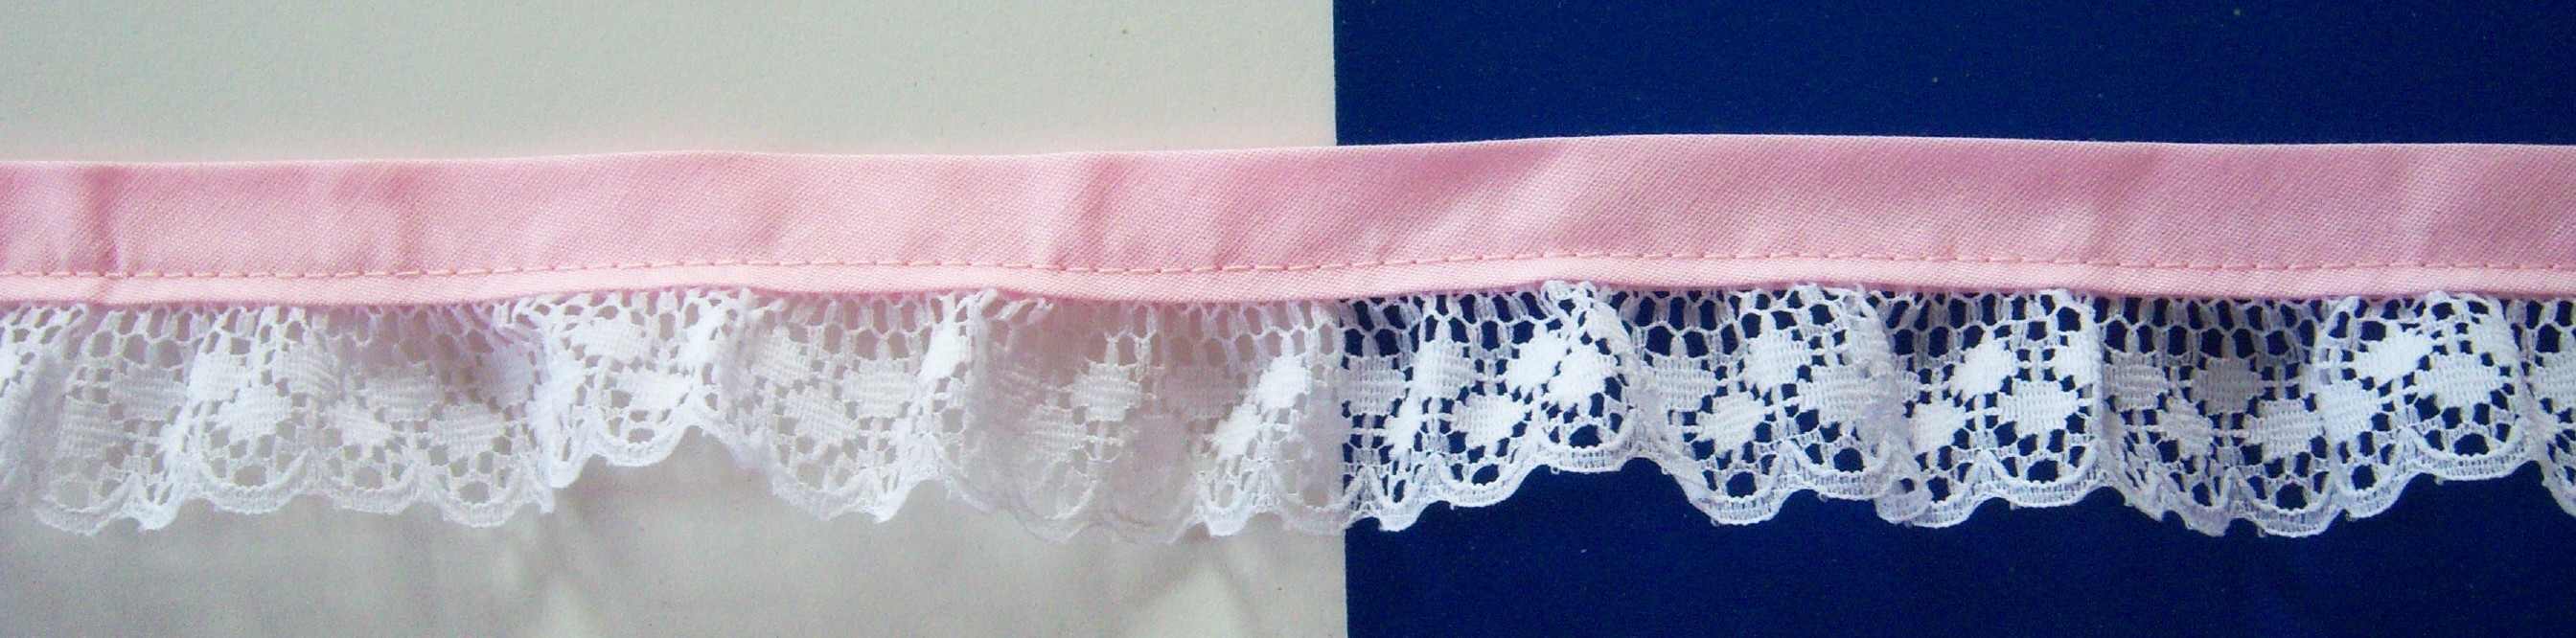 Pink Foldover/White 1 5/8" Gathered Lace